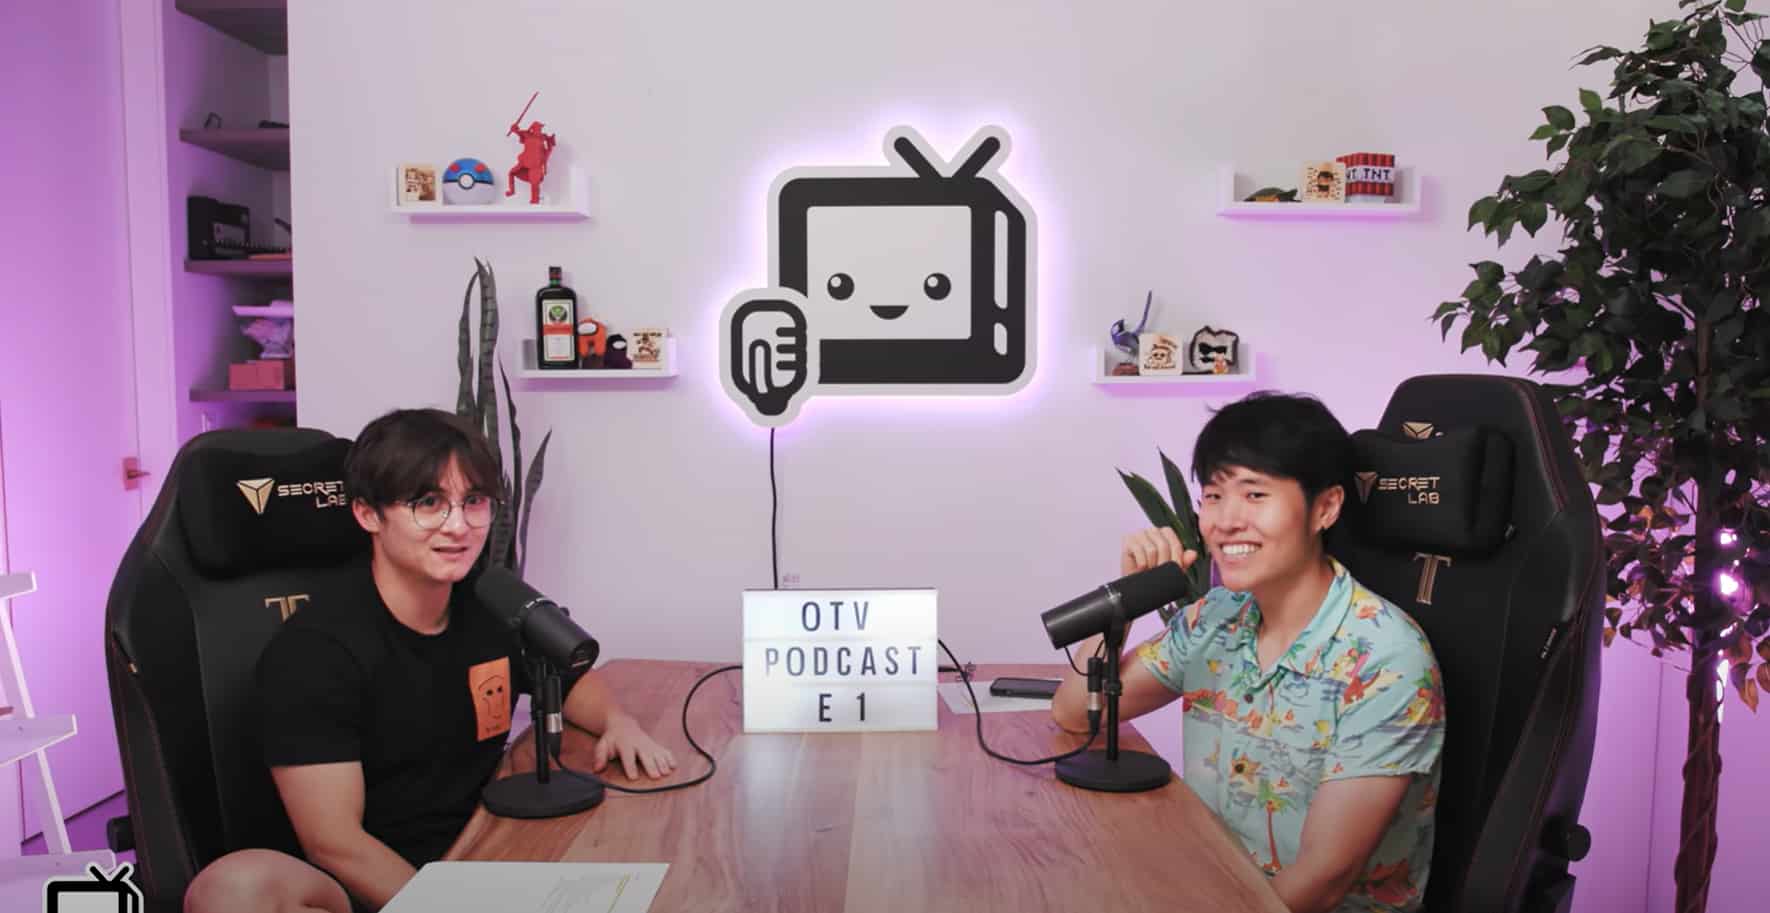 Screenshot of Michael Reeves and Disguised Toast during OfflineTV podcast